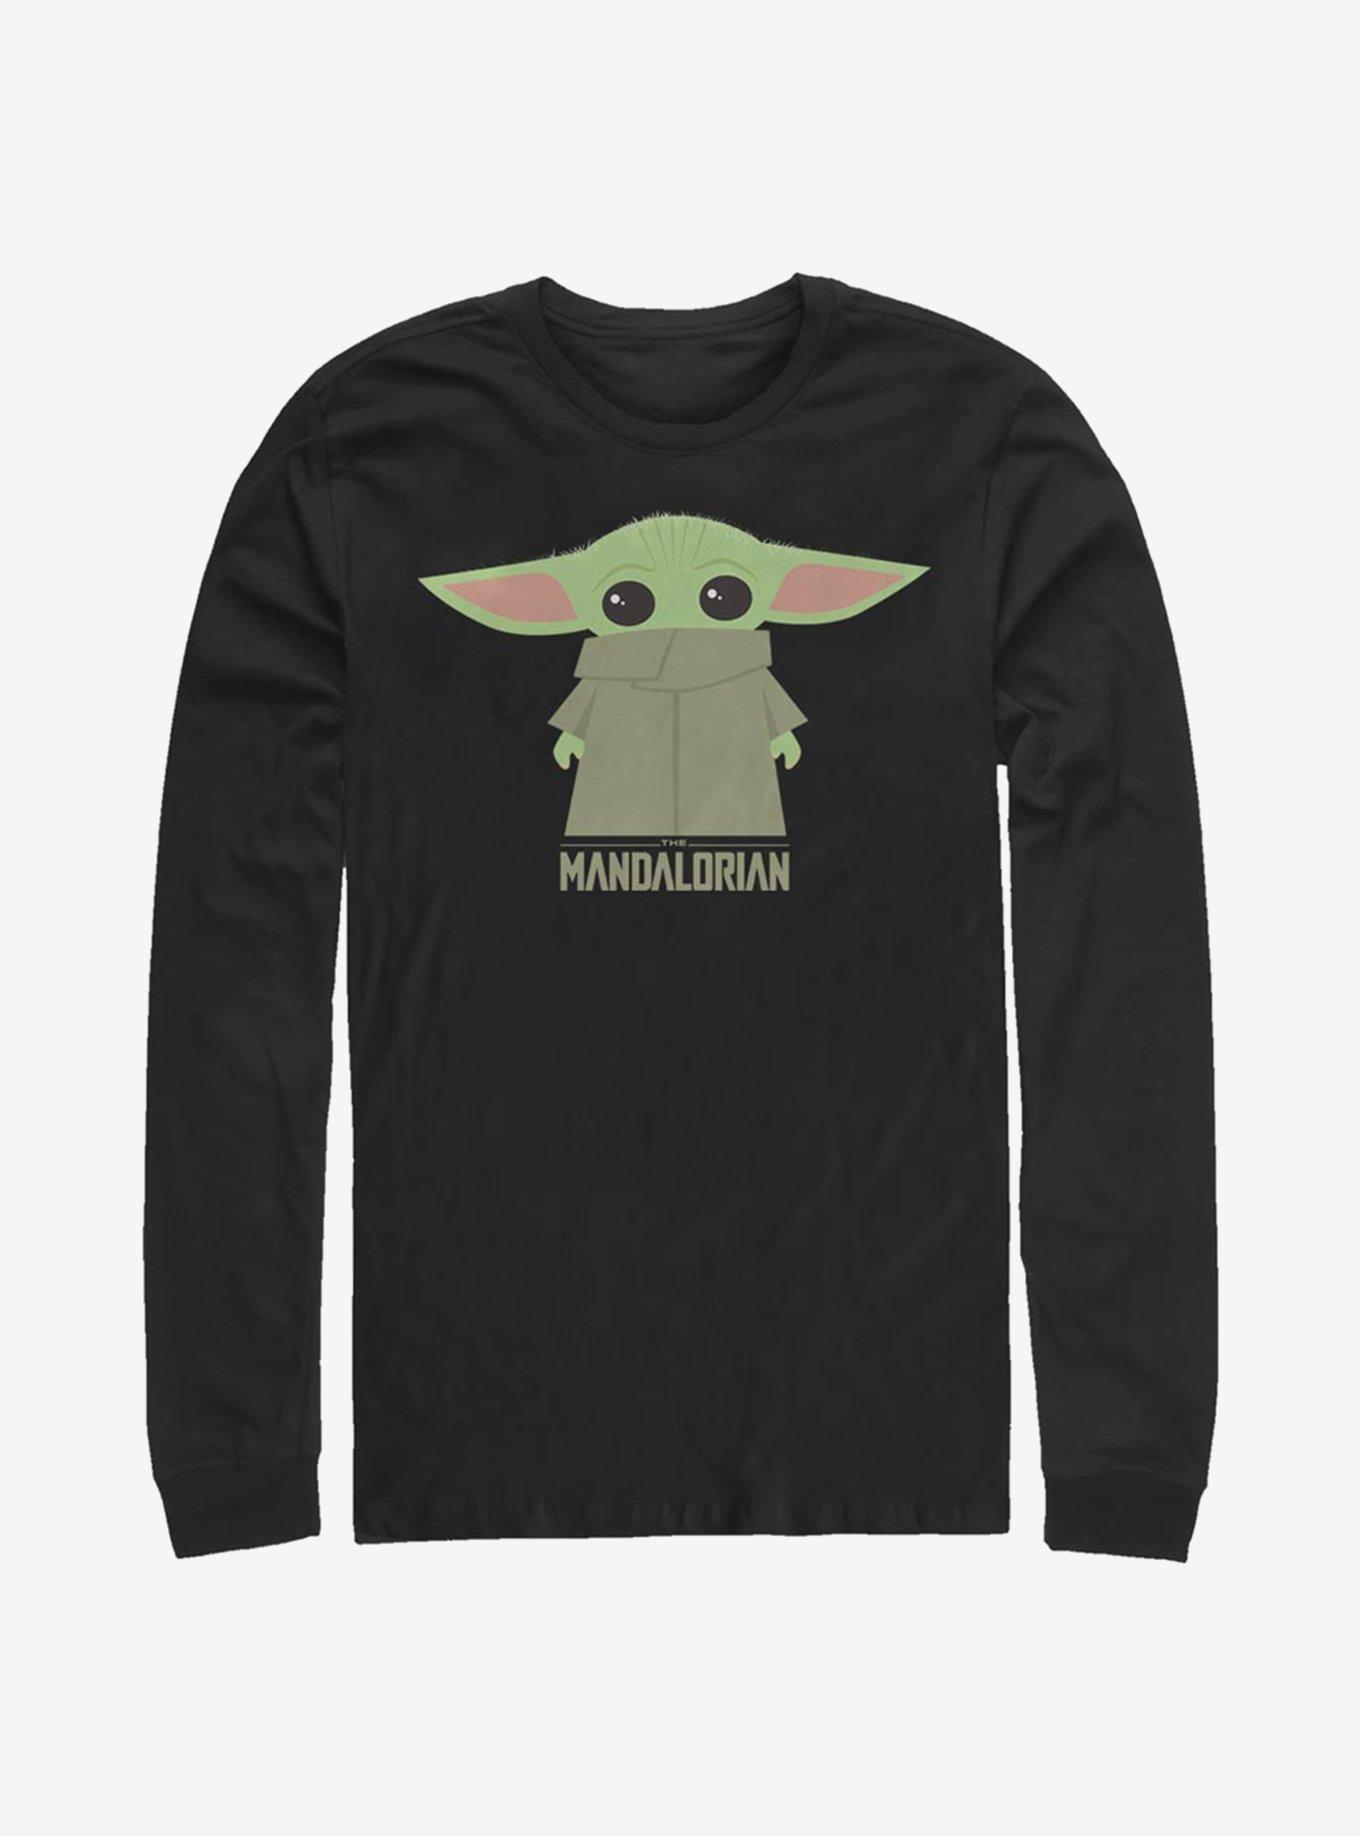 Star Wars The Mandalorian The Child Covered Face Long-Sleeve T-Shirt, BLACK, hi-res